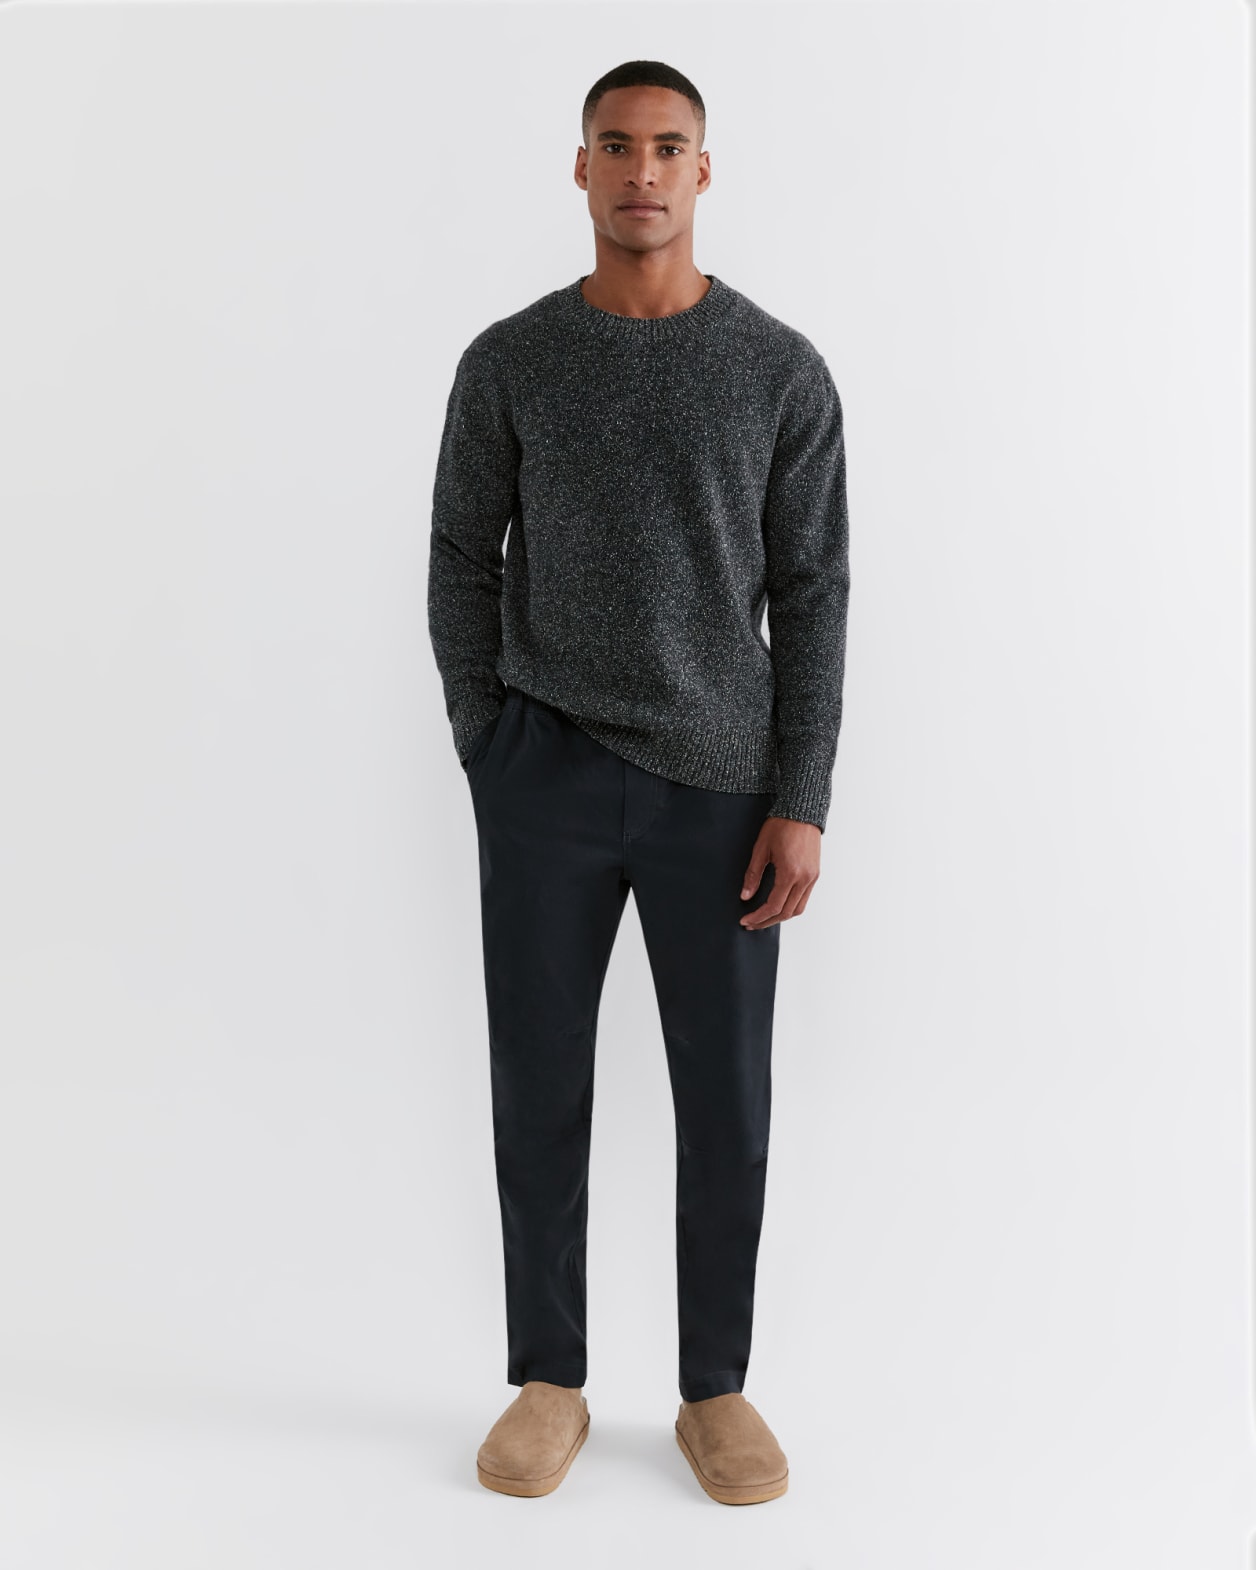 Tanner Wool Crew Knit in CHARCOAL